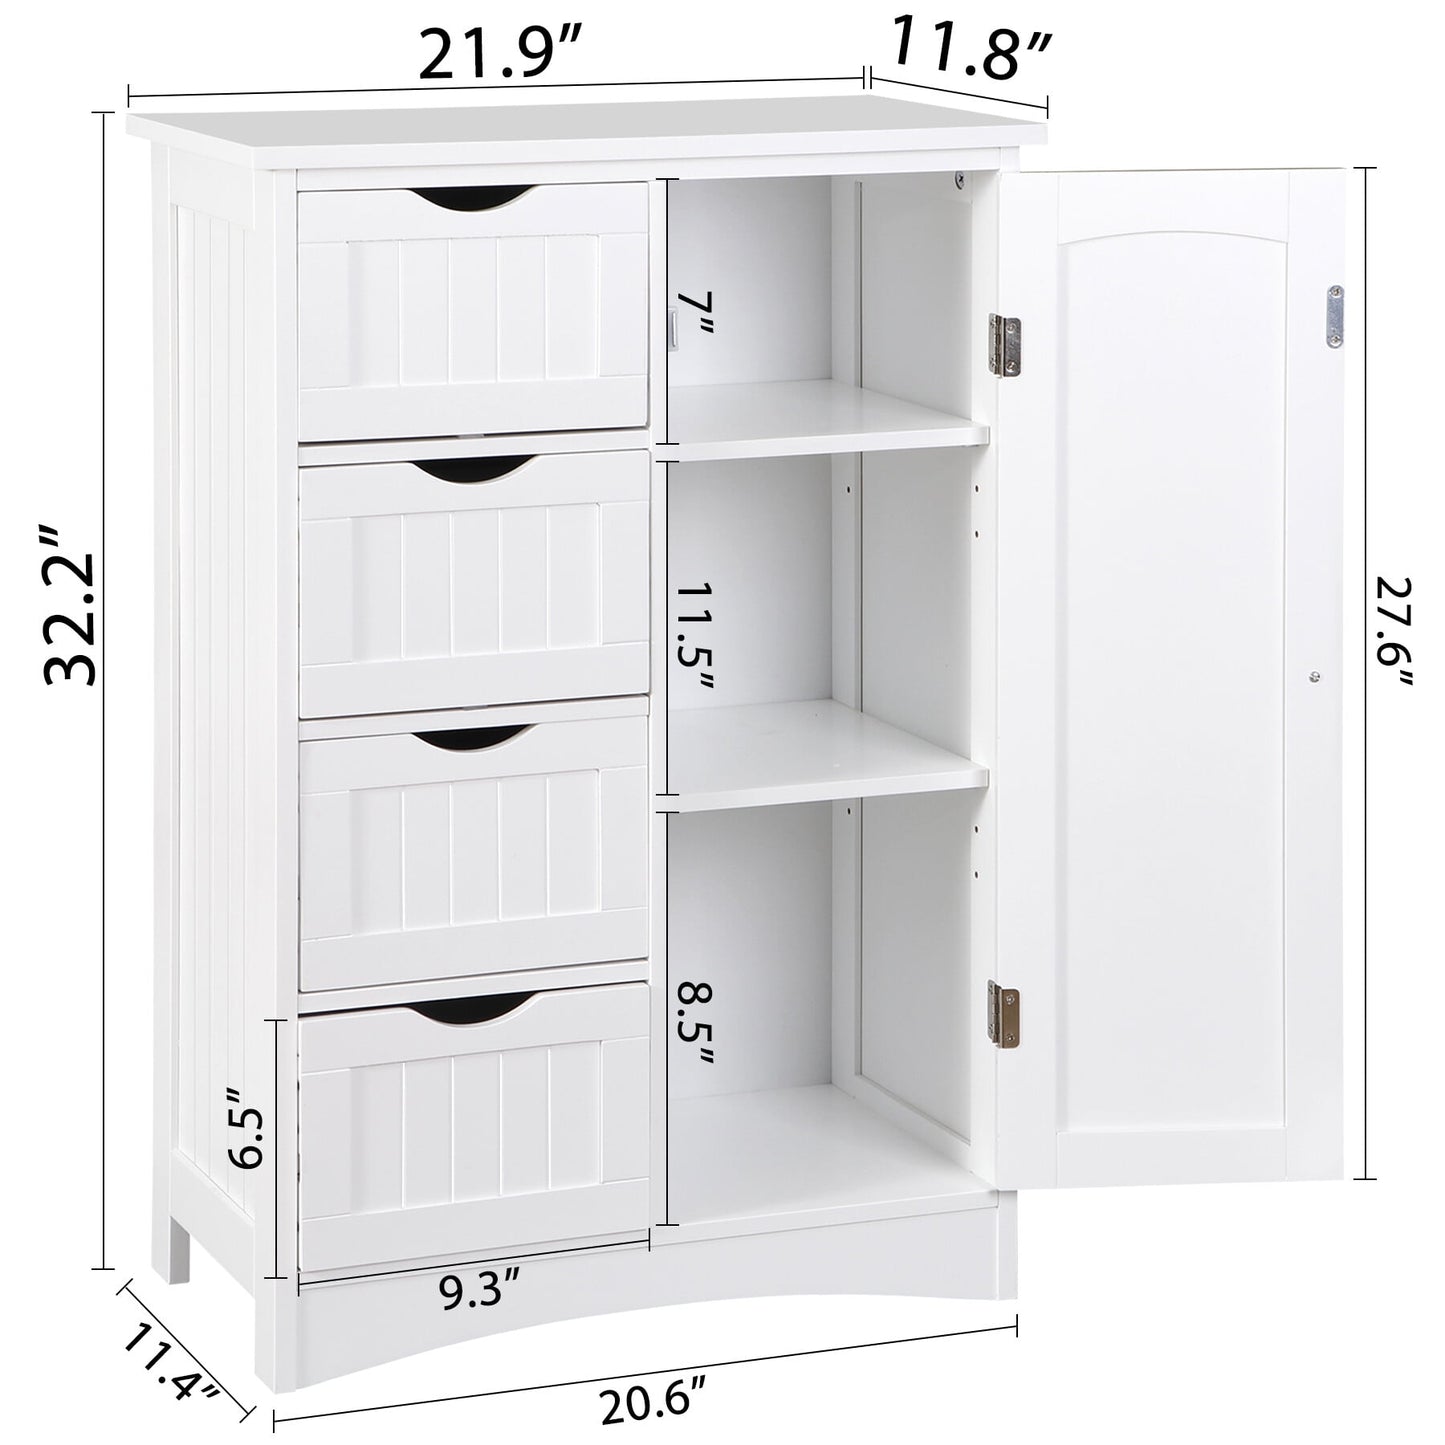 ZENY Bathroom Floor Cabinet, Freestanding Storage Cabinet with 4 Drawers and Adjustable Shelves, Modern Cupboard for Home Living Room Office, White